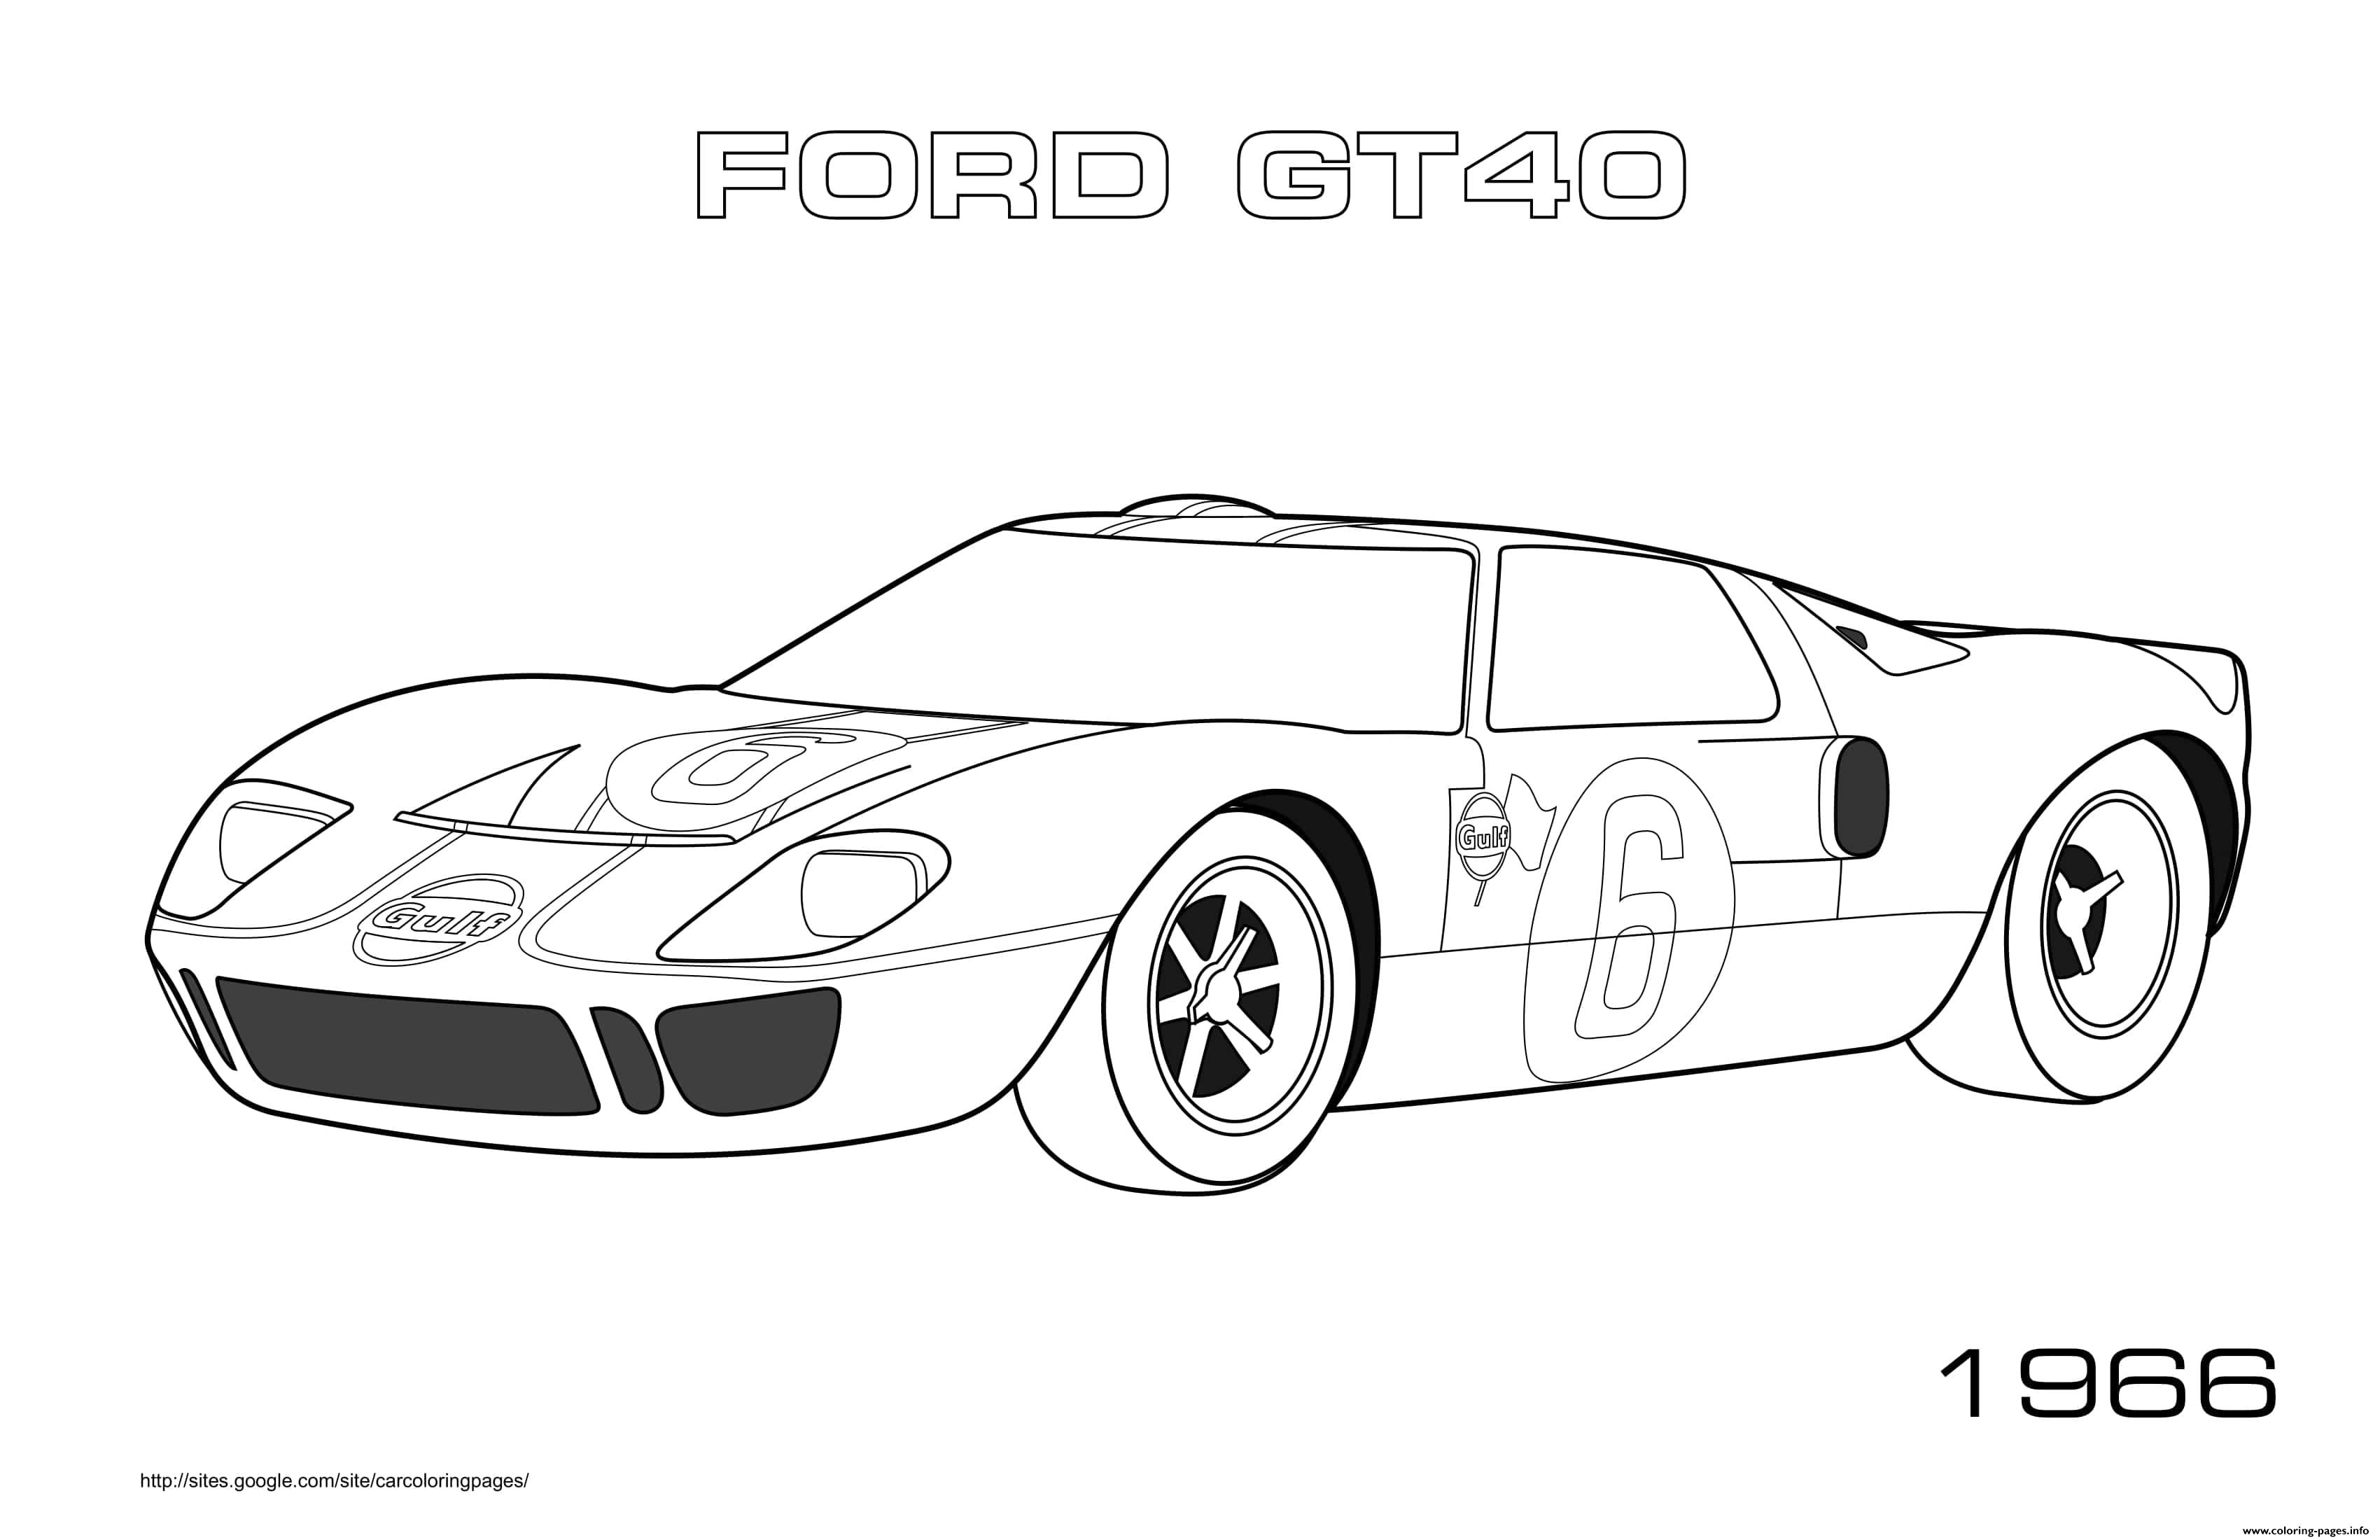 Ford Gt40 1966 coloring